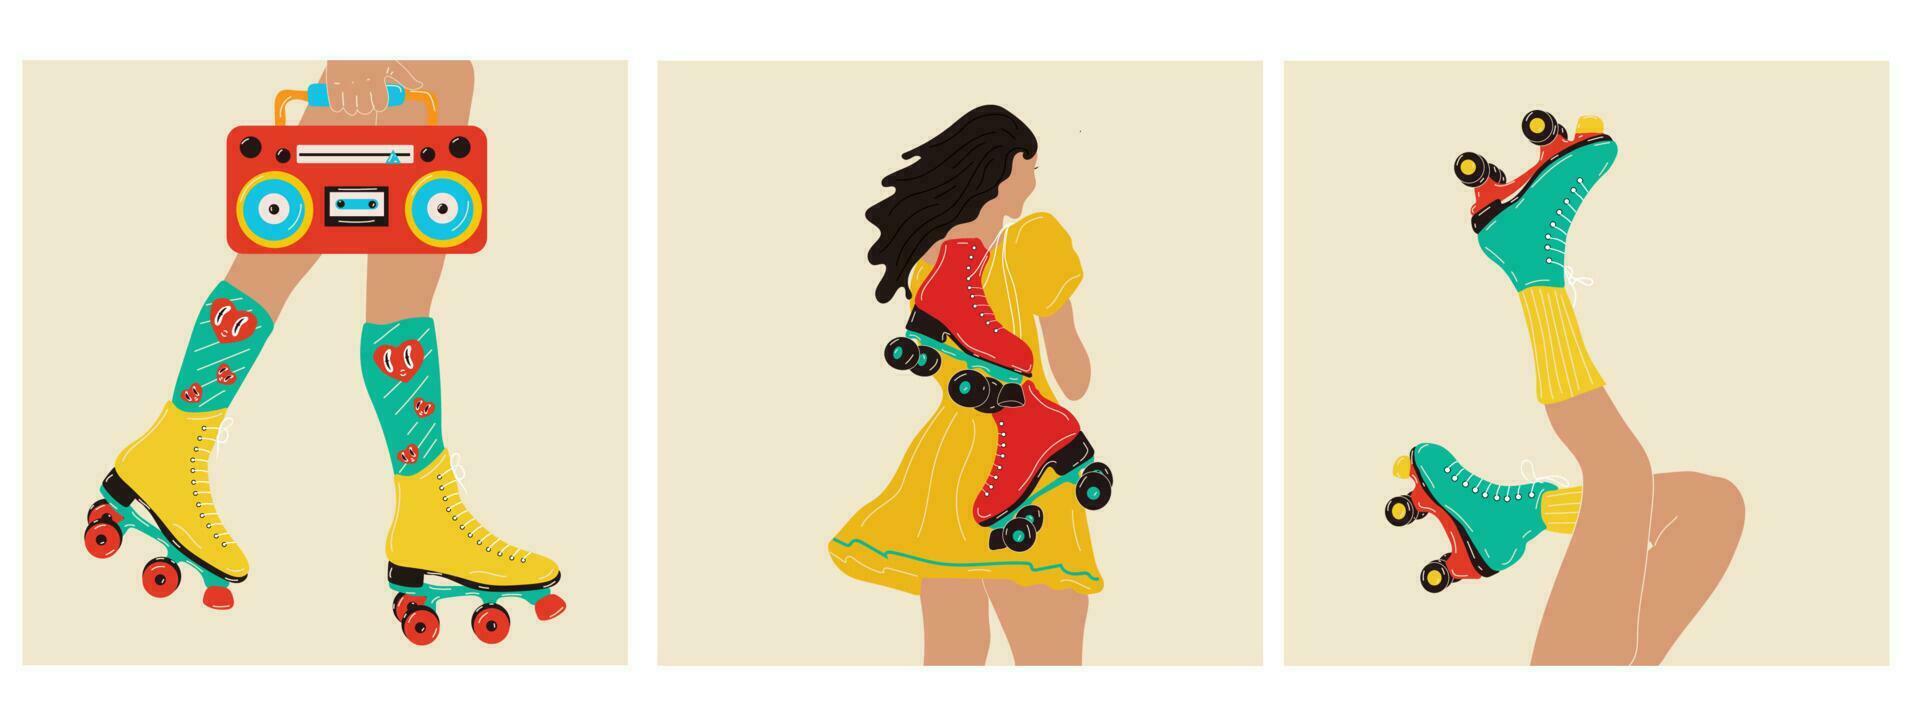 Set of posters with roller skates, Boombox and a girl with roller skates. Sport and disco. Retro fashion style from 80s. Vector illustrations in trendy colors. Hand drawn style